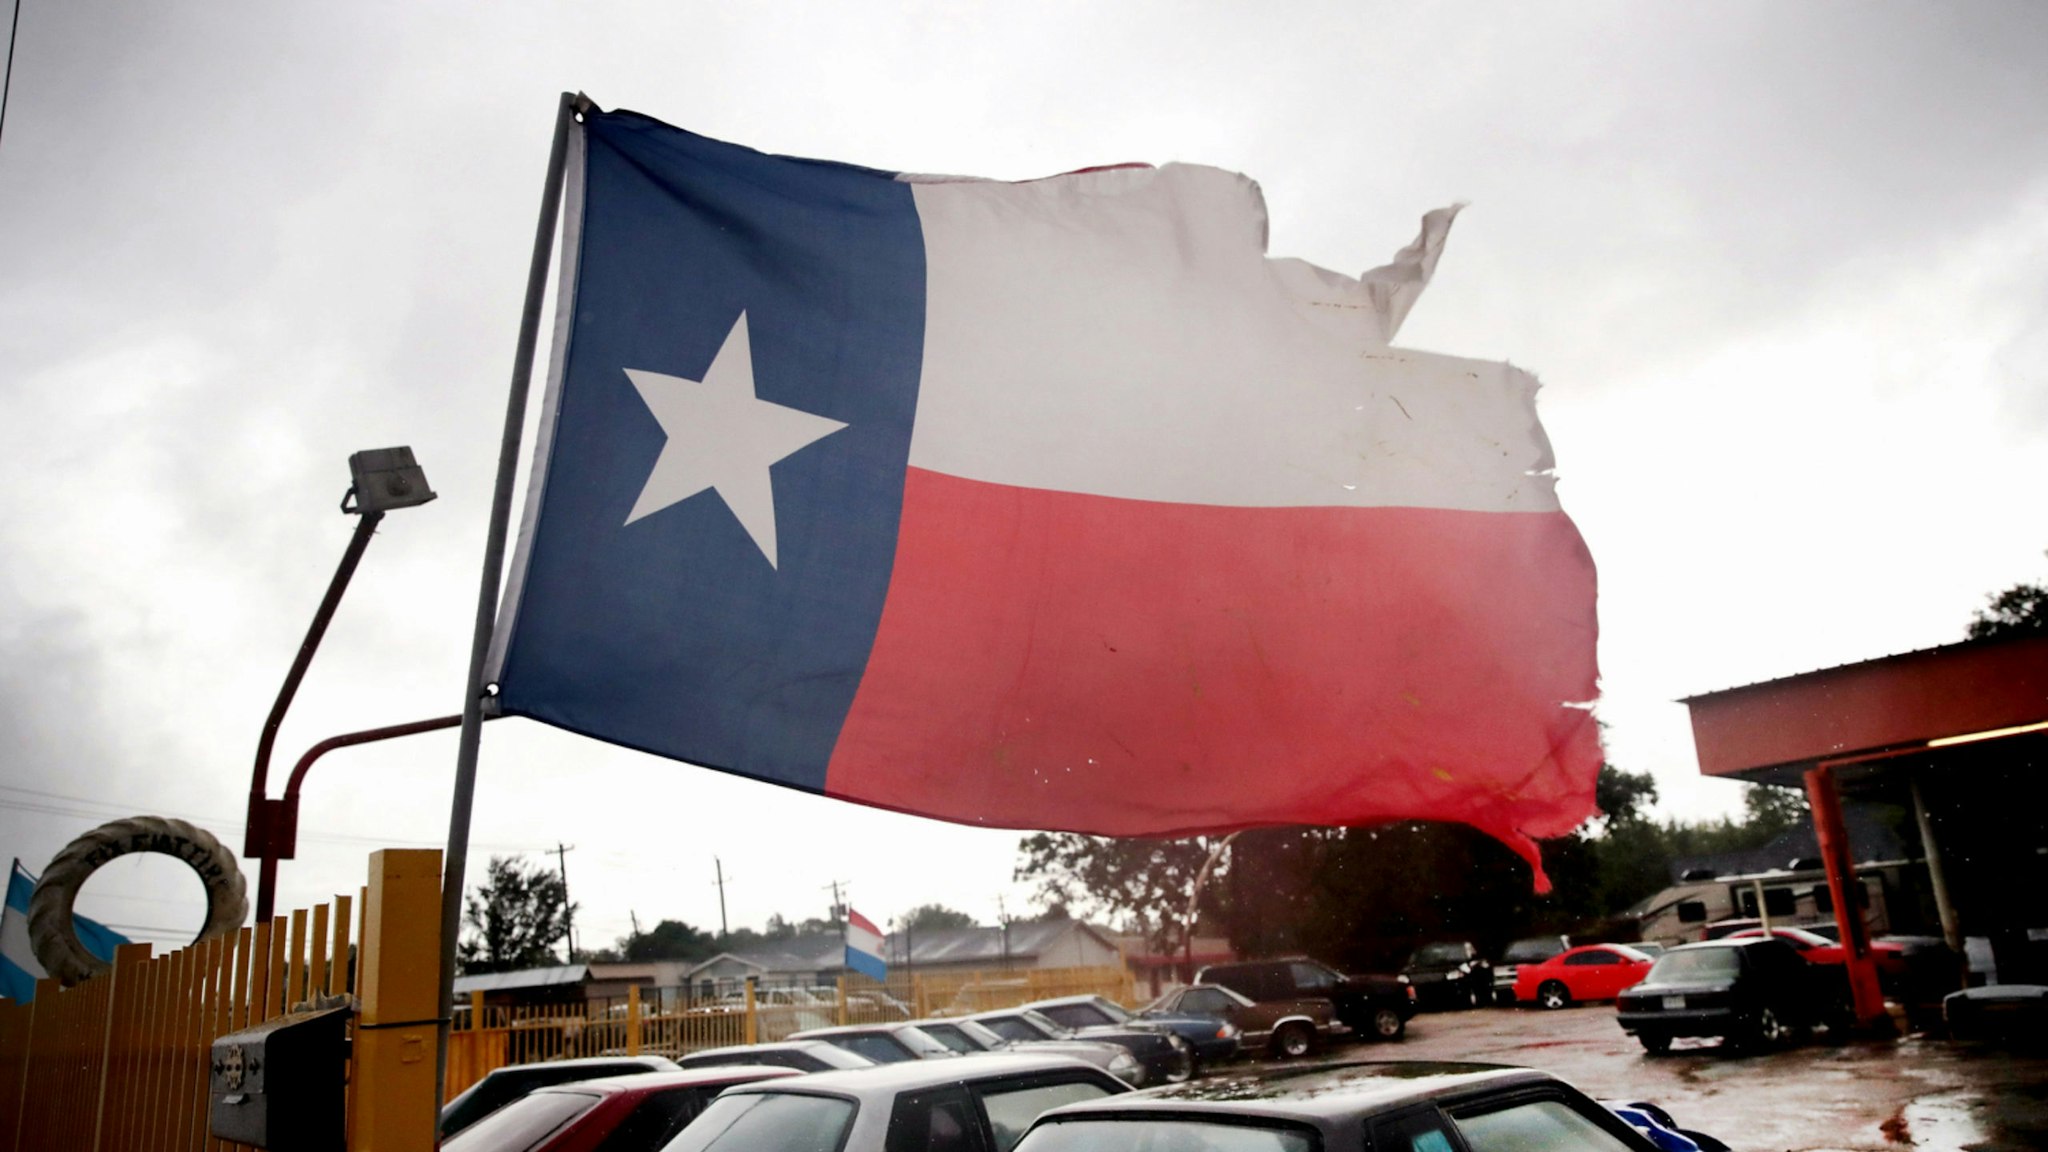 Wind from Hurricane Harvey batters a Texas flag on August 26, 2017 in Houston, Texas.